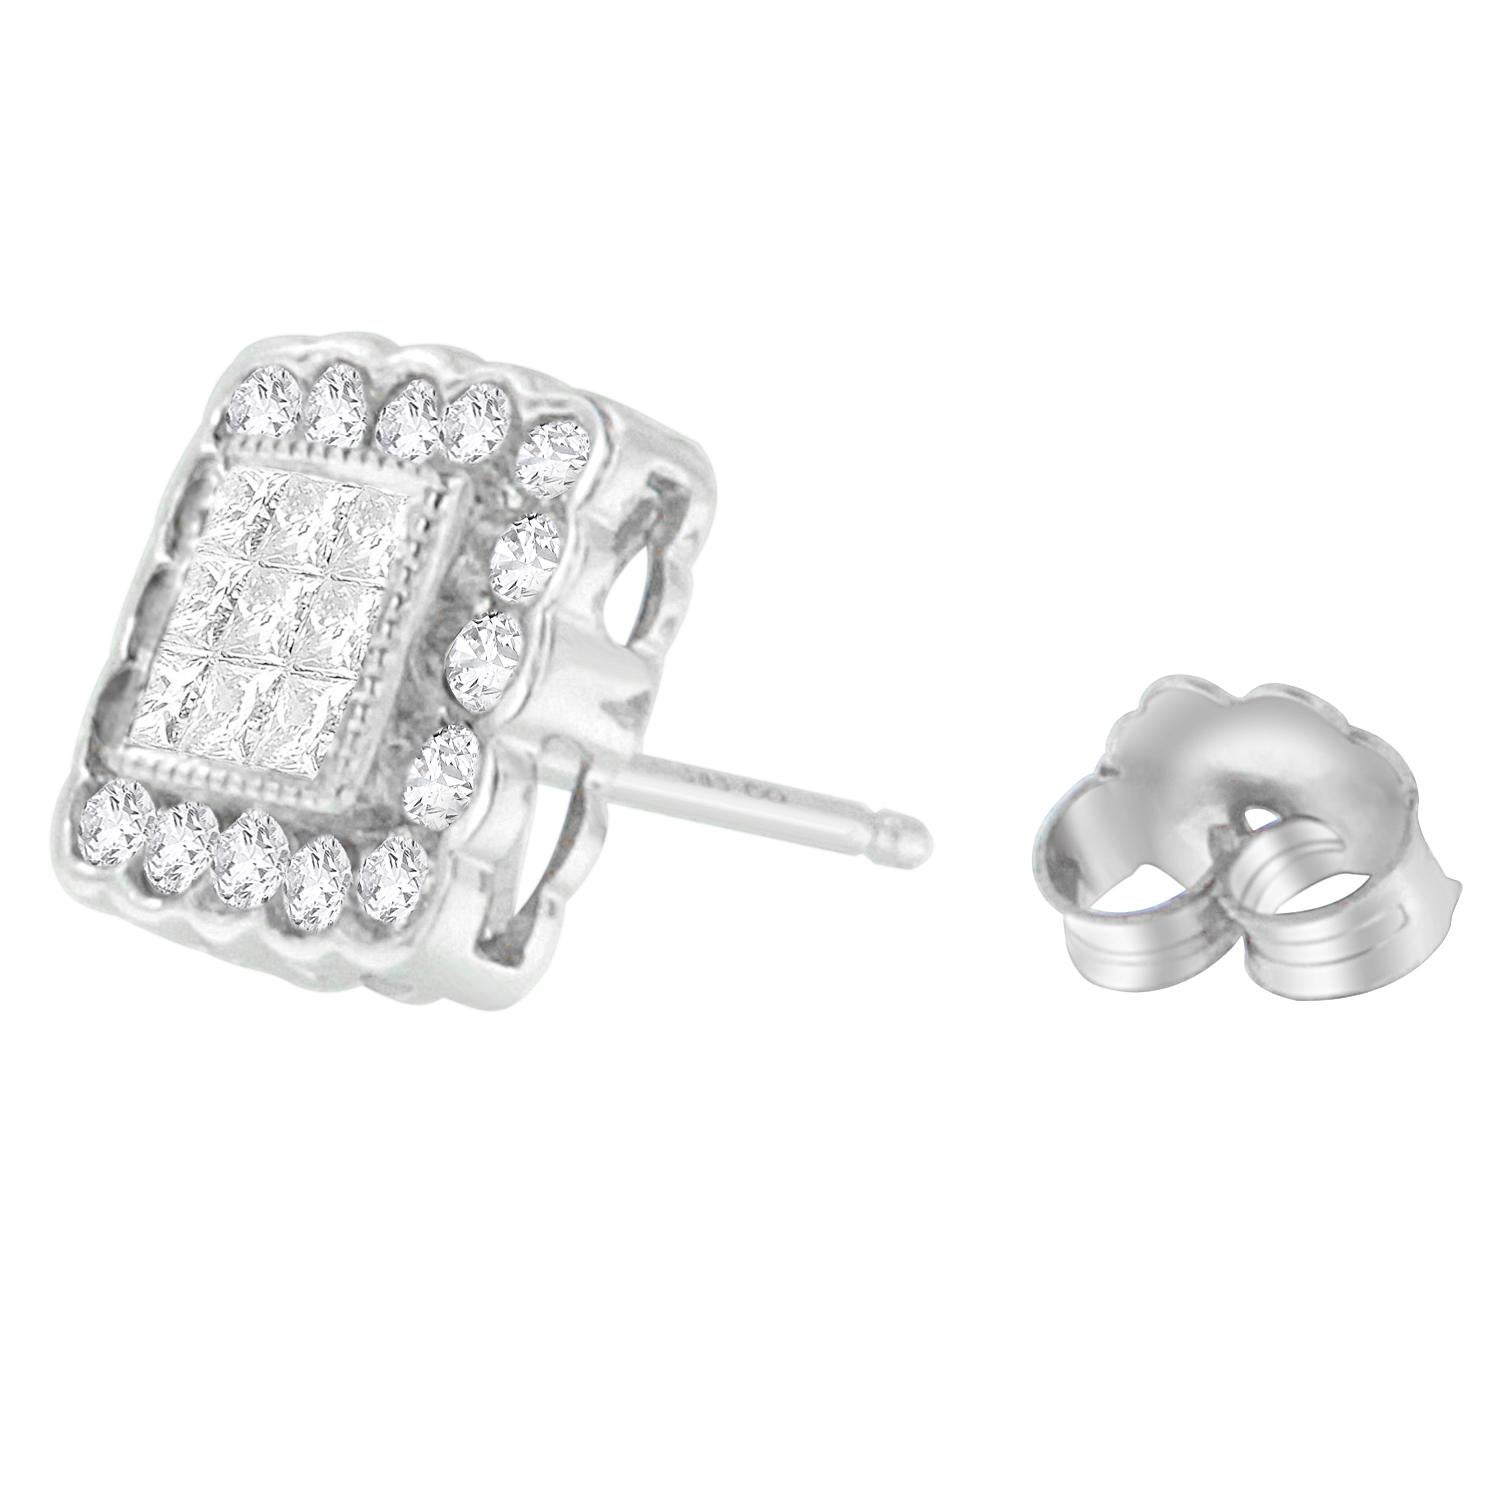 Contemporary 14K White Gold 1.0 Carat Round-Cut and Princess-Cut Diamond Stud Earring For Sale